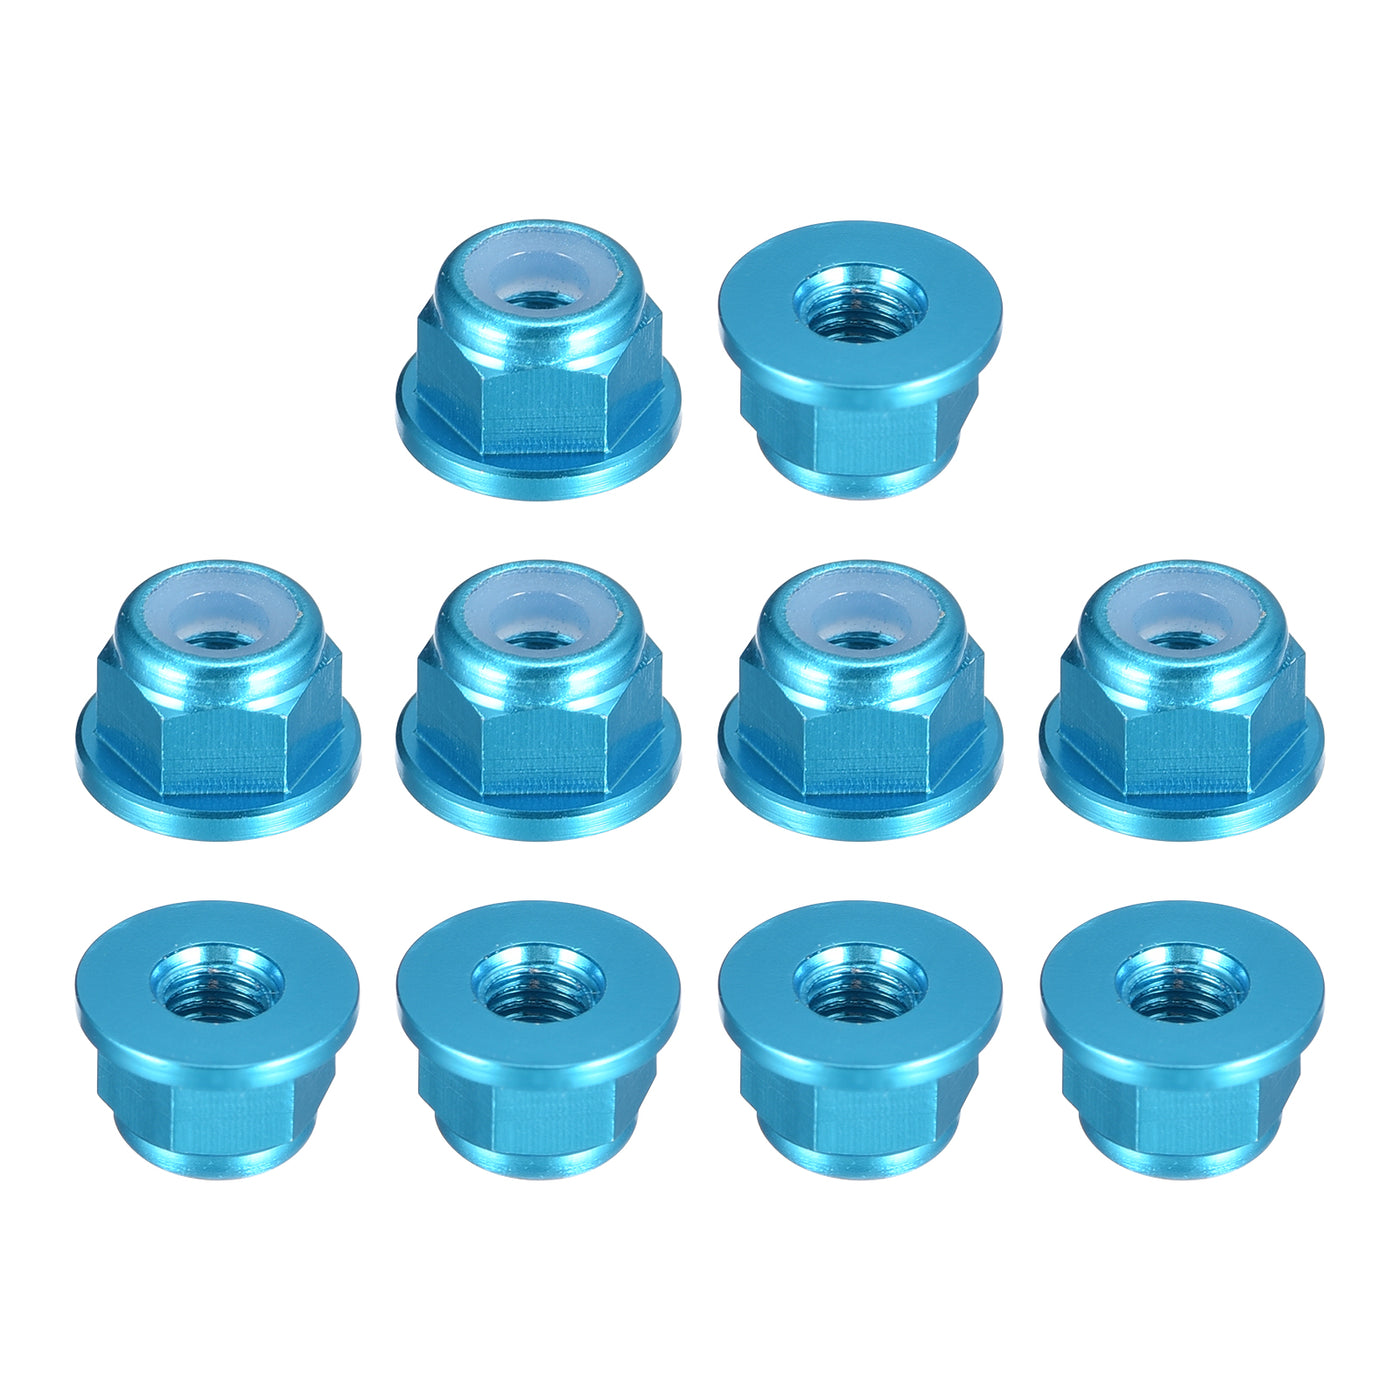 uxcell Uxcell Nylon Insert Hex Lock Nuts, 10pcs - M3 x 0.5mm Aluminum Alloy Self-Locking Nut, Anodizing Flange Lock Nut for Fasteners (Sky Blue)